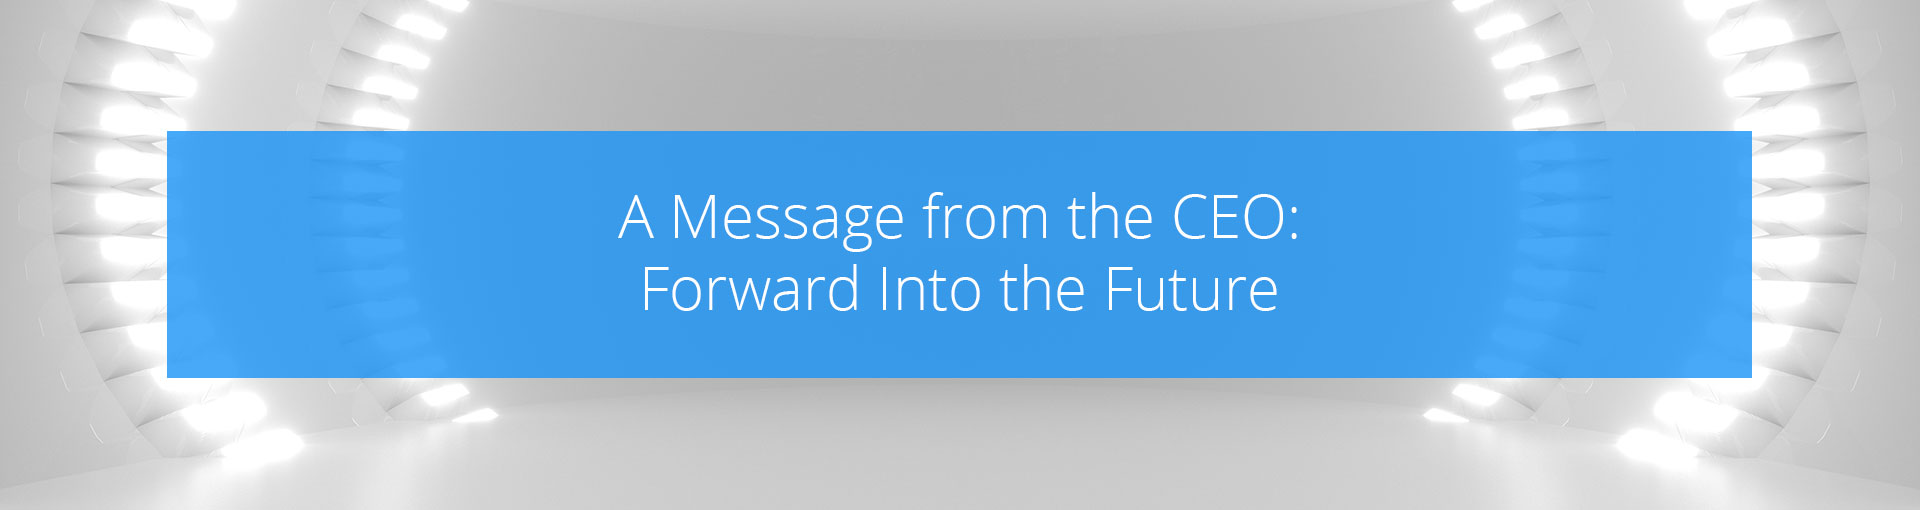 A Message from the CEO: Forward Into the Future Featured Image